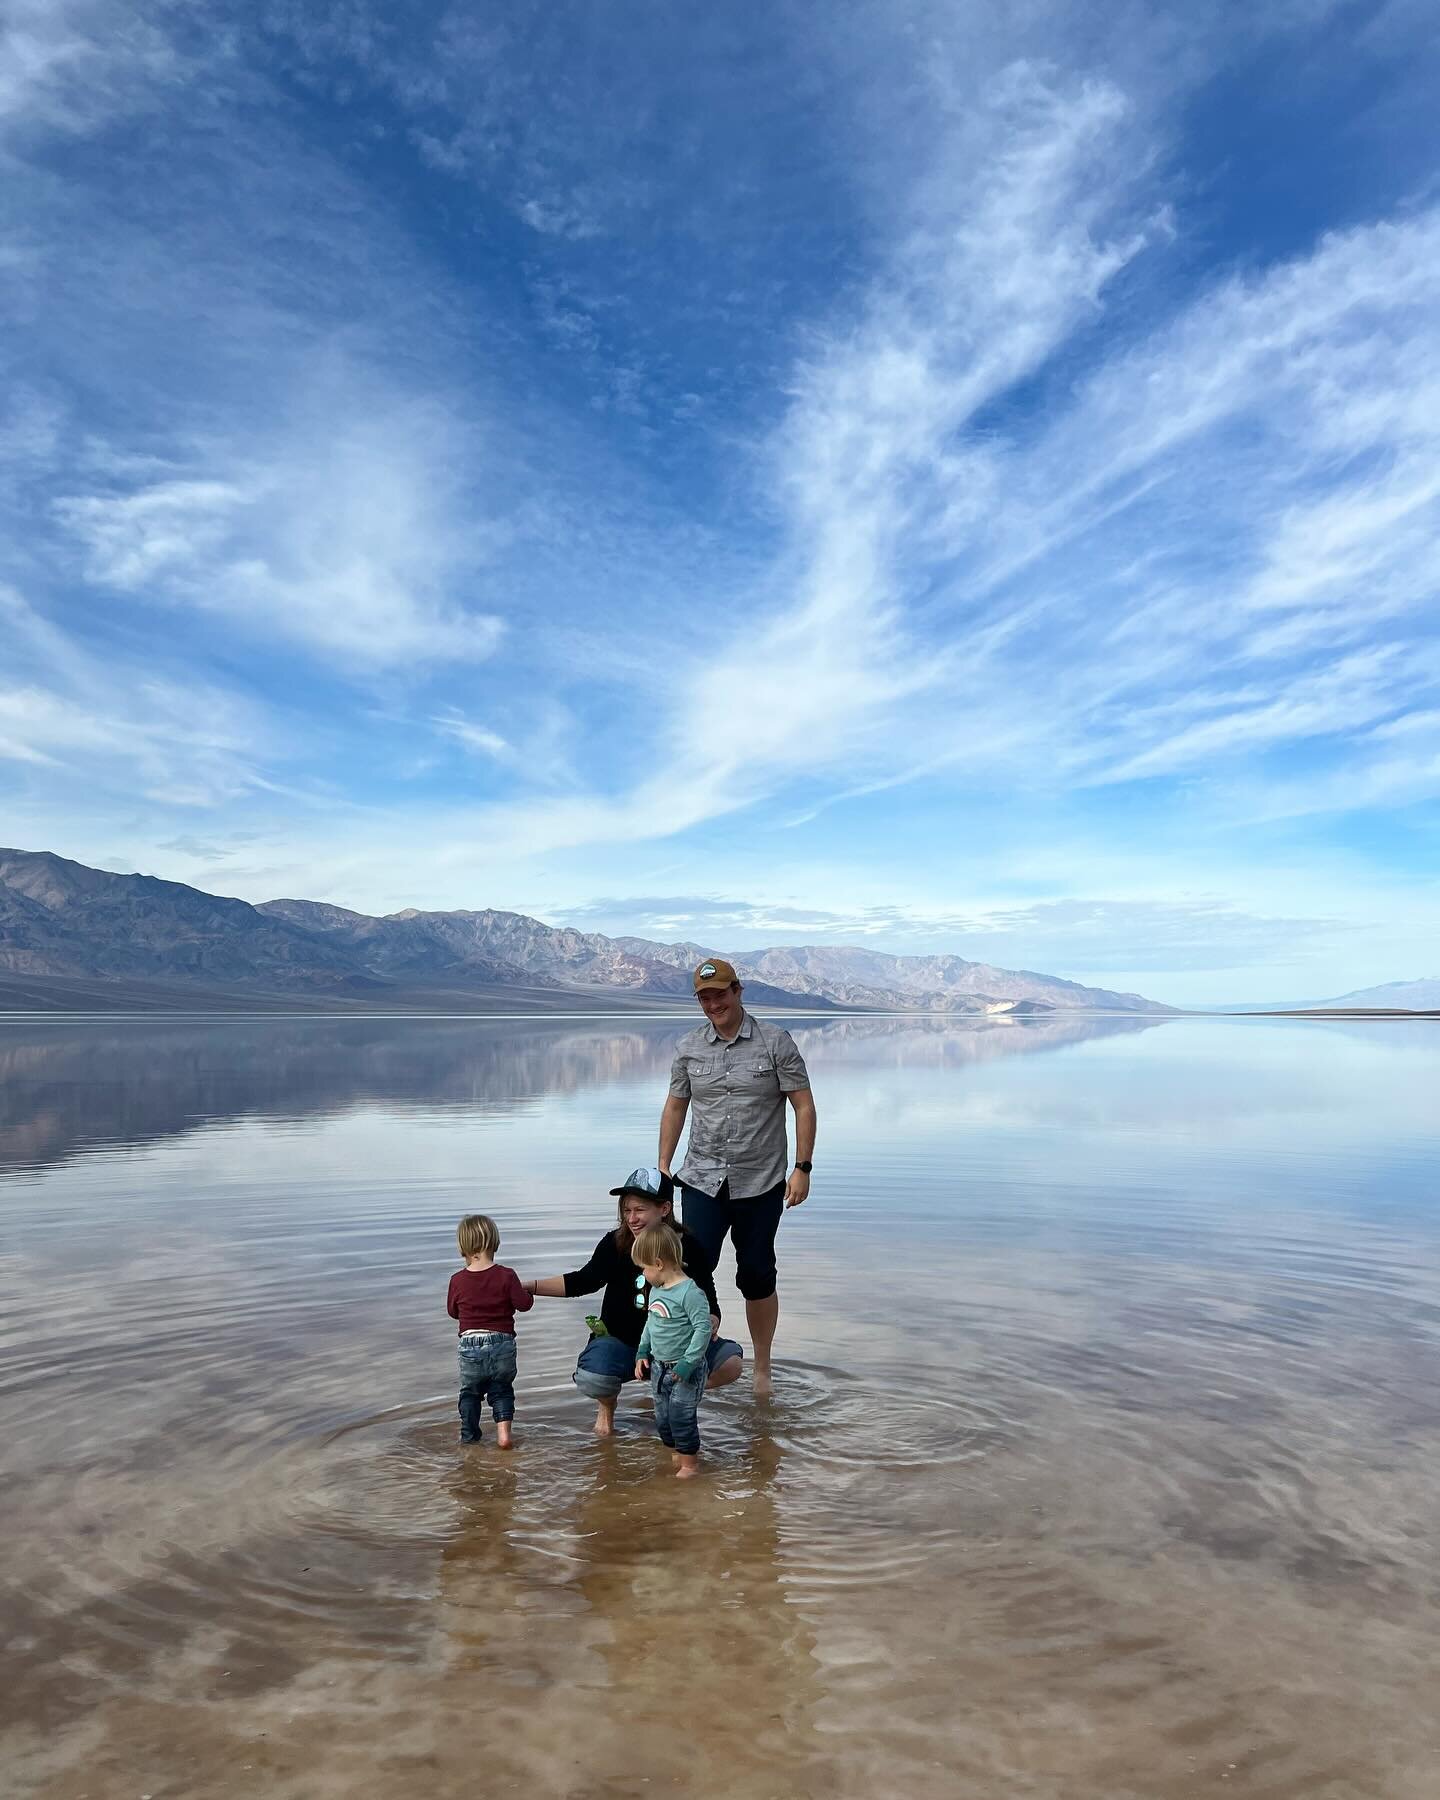 Staff Adventures: Death Valley Edition! Sierra STEM&rsquo;s Executive Director, Neal, went to Death Valley National Park with his family to see the ephemeral Lake Manly, which only forms during major precipitation events in the Badwater Basin. We lov